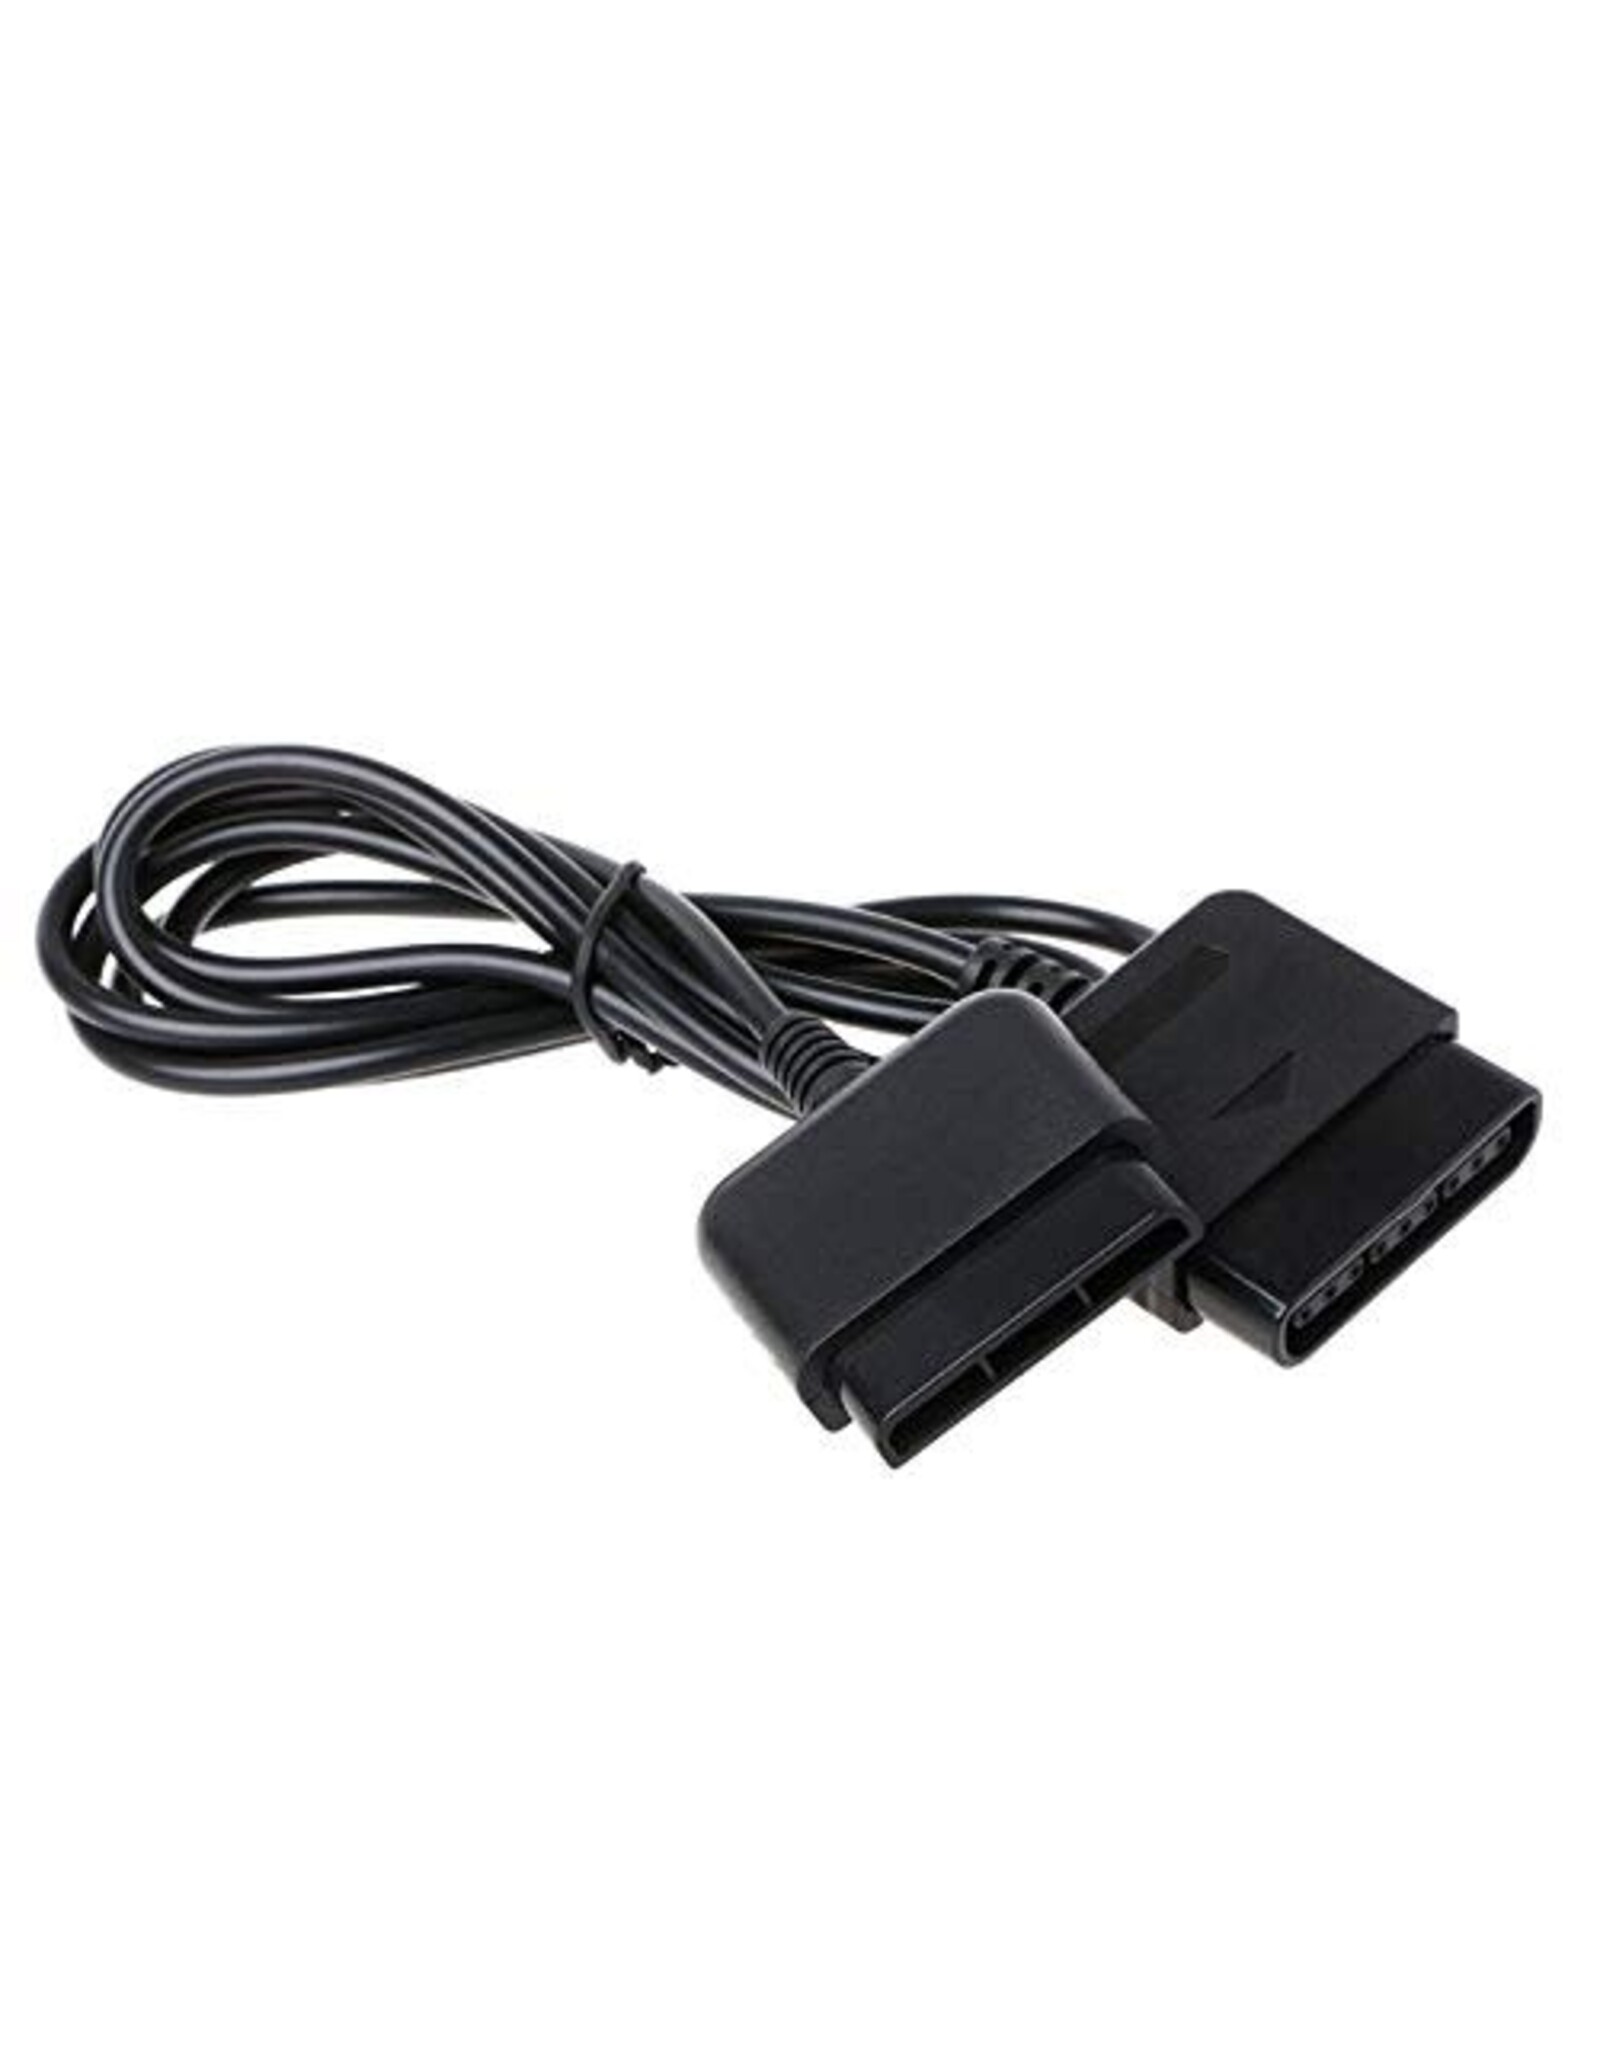 Playstation PS Playstation 1/2 Extension Cord (Used, 3rd Party, Assorted Colors/Brands)